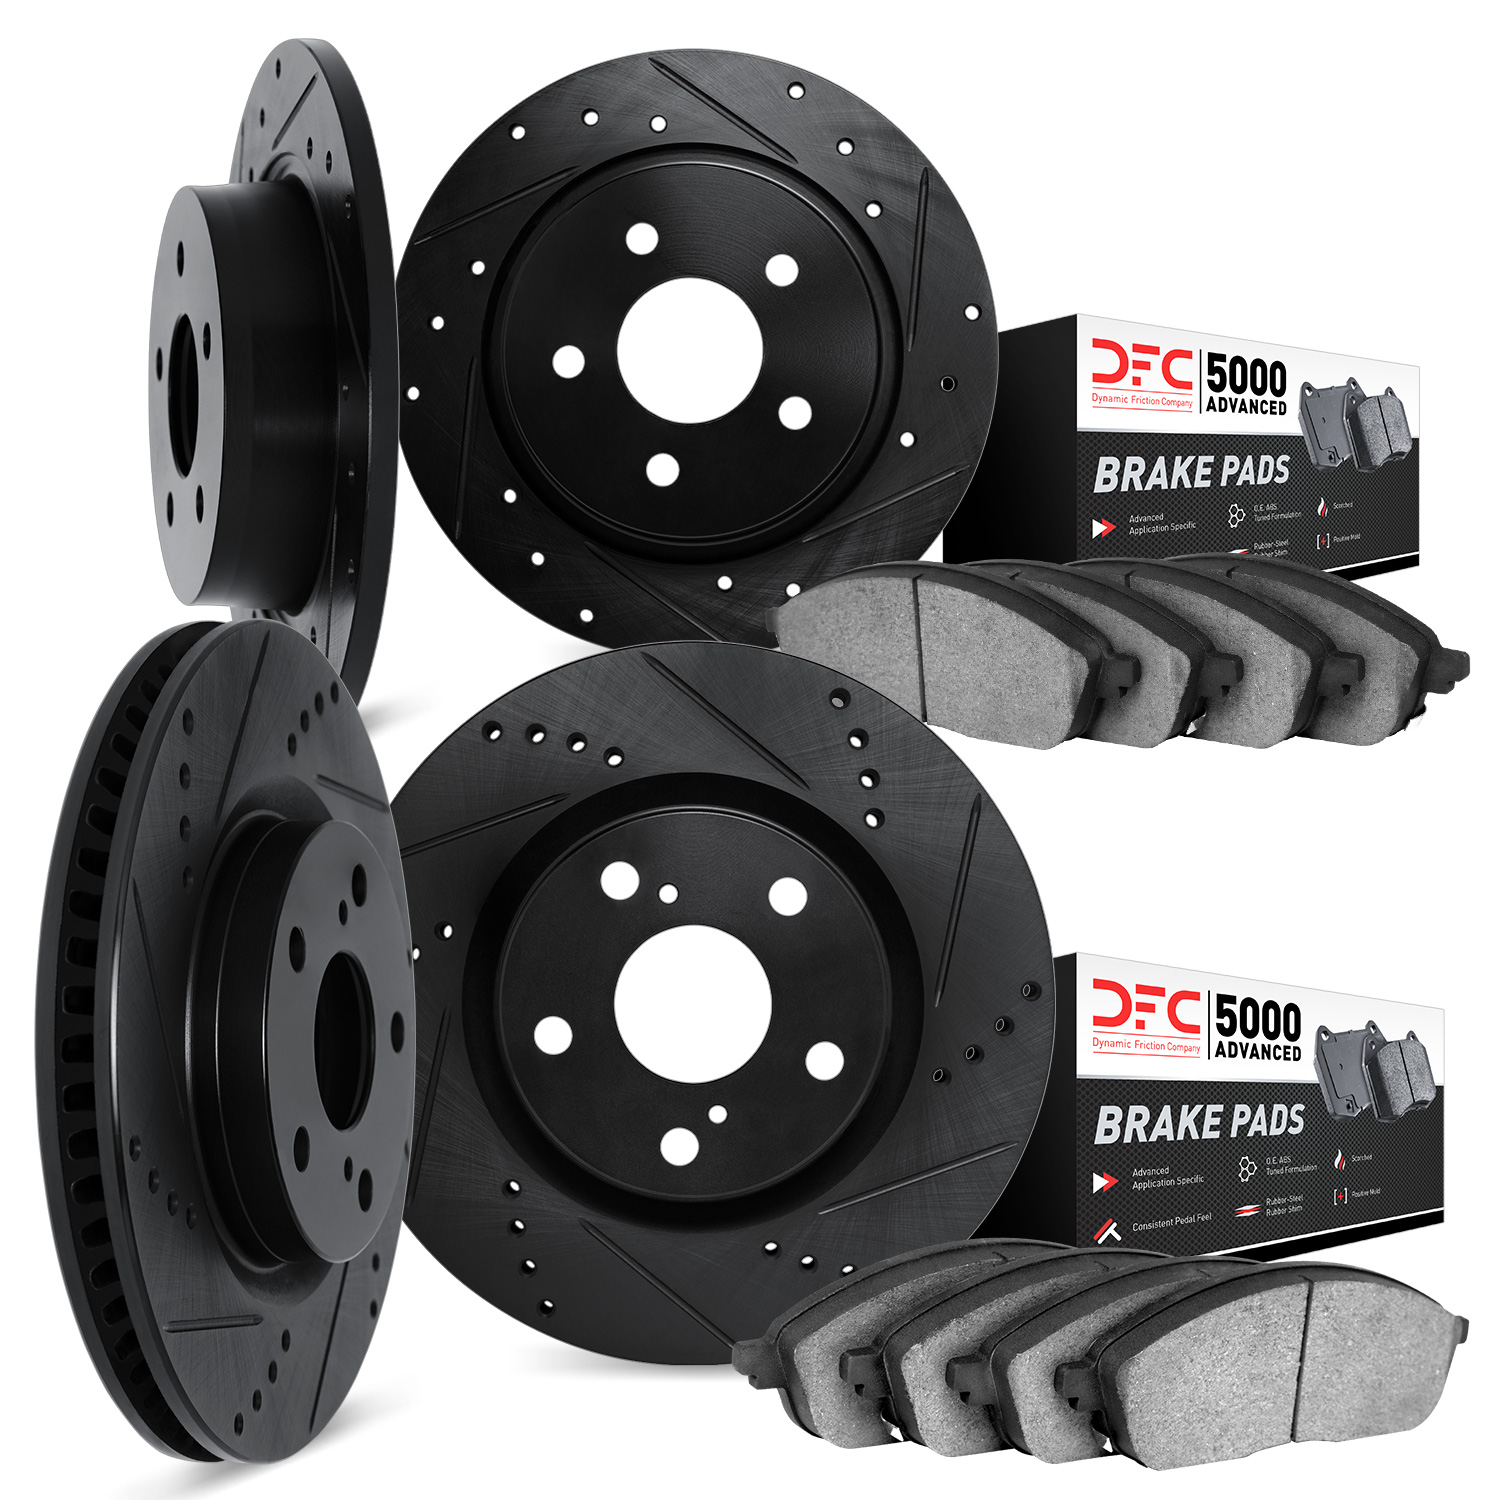 8504-59050 Drilled/Slotted Brake Rotors w/5000 Advanced Brake Pads Kit [Black], 2011-2014 Acura/Honda, Position: Front and Rear